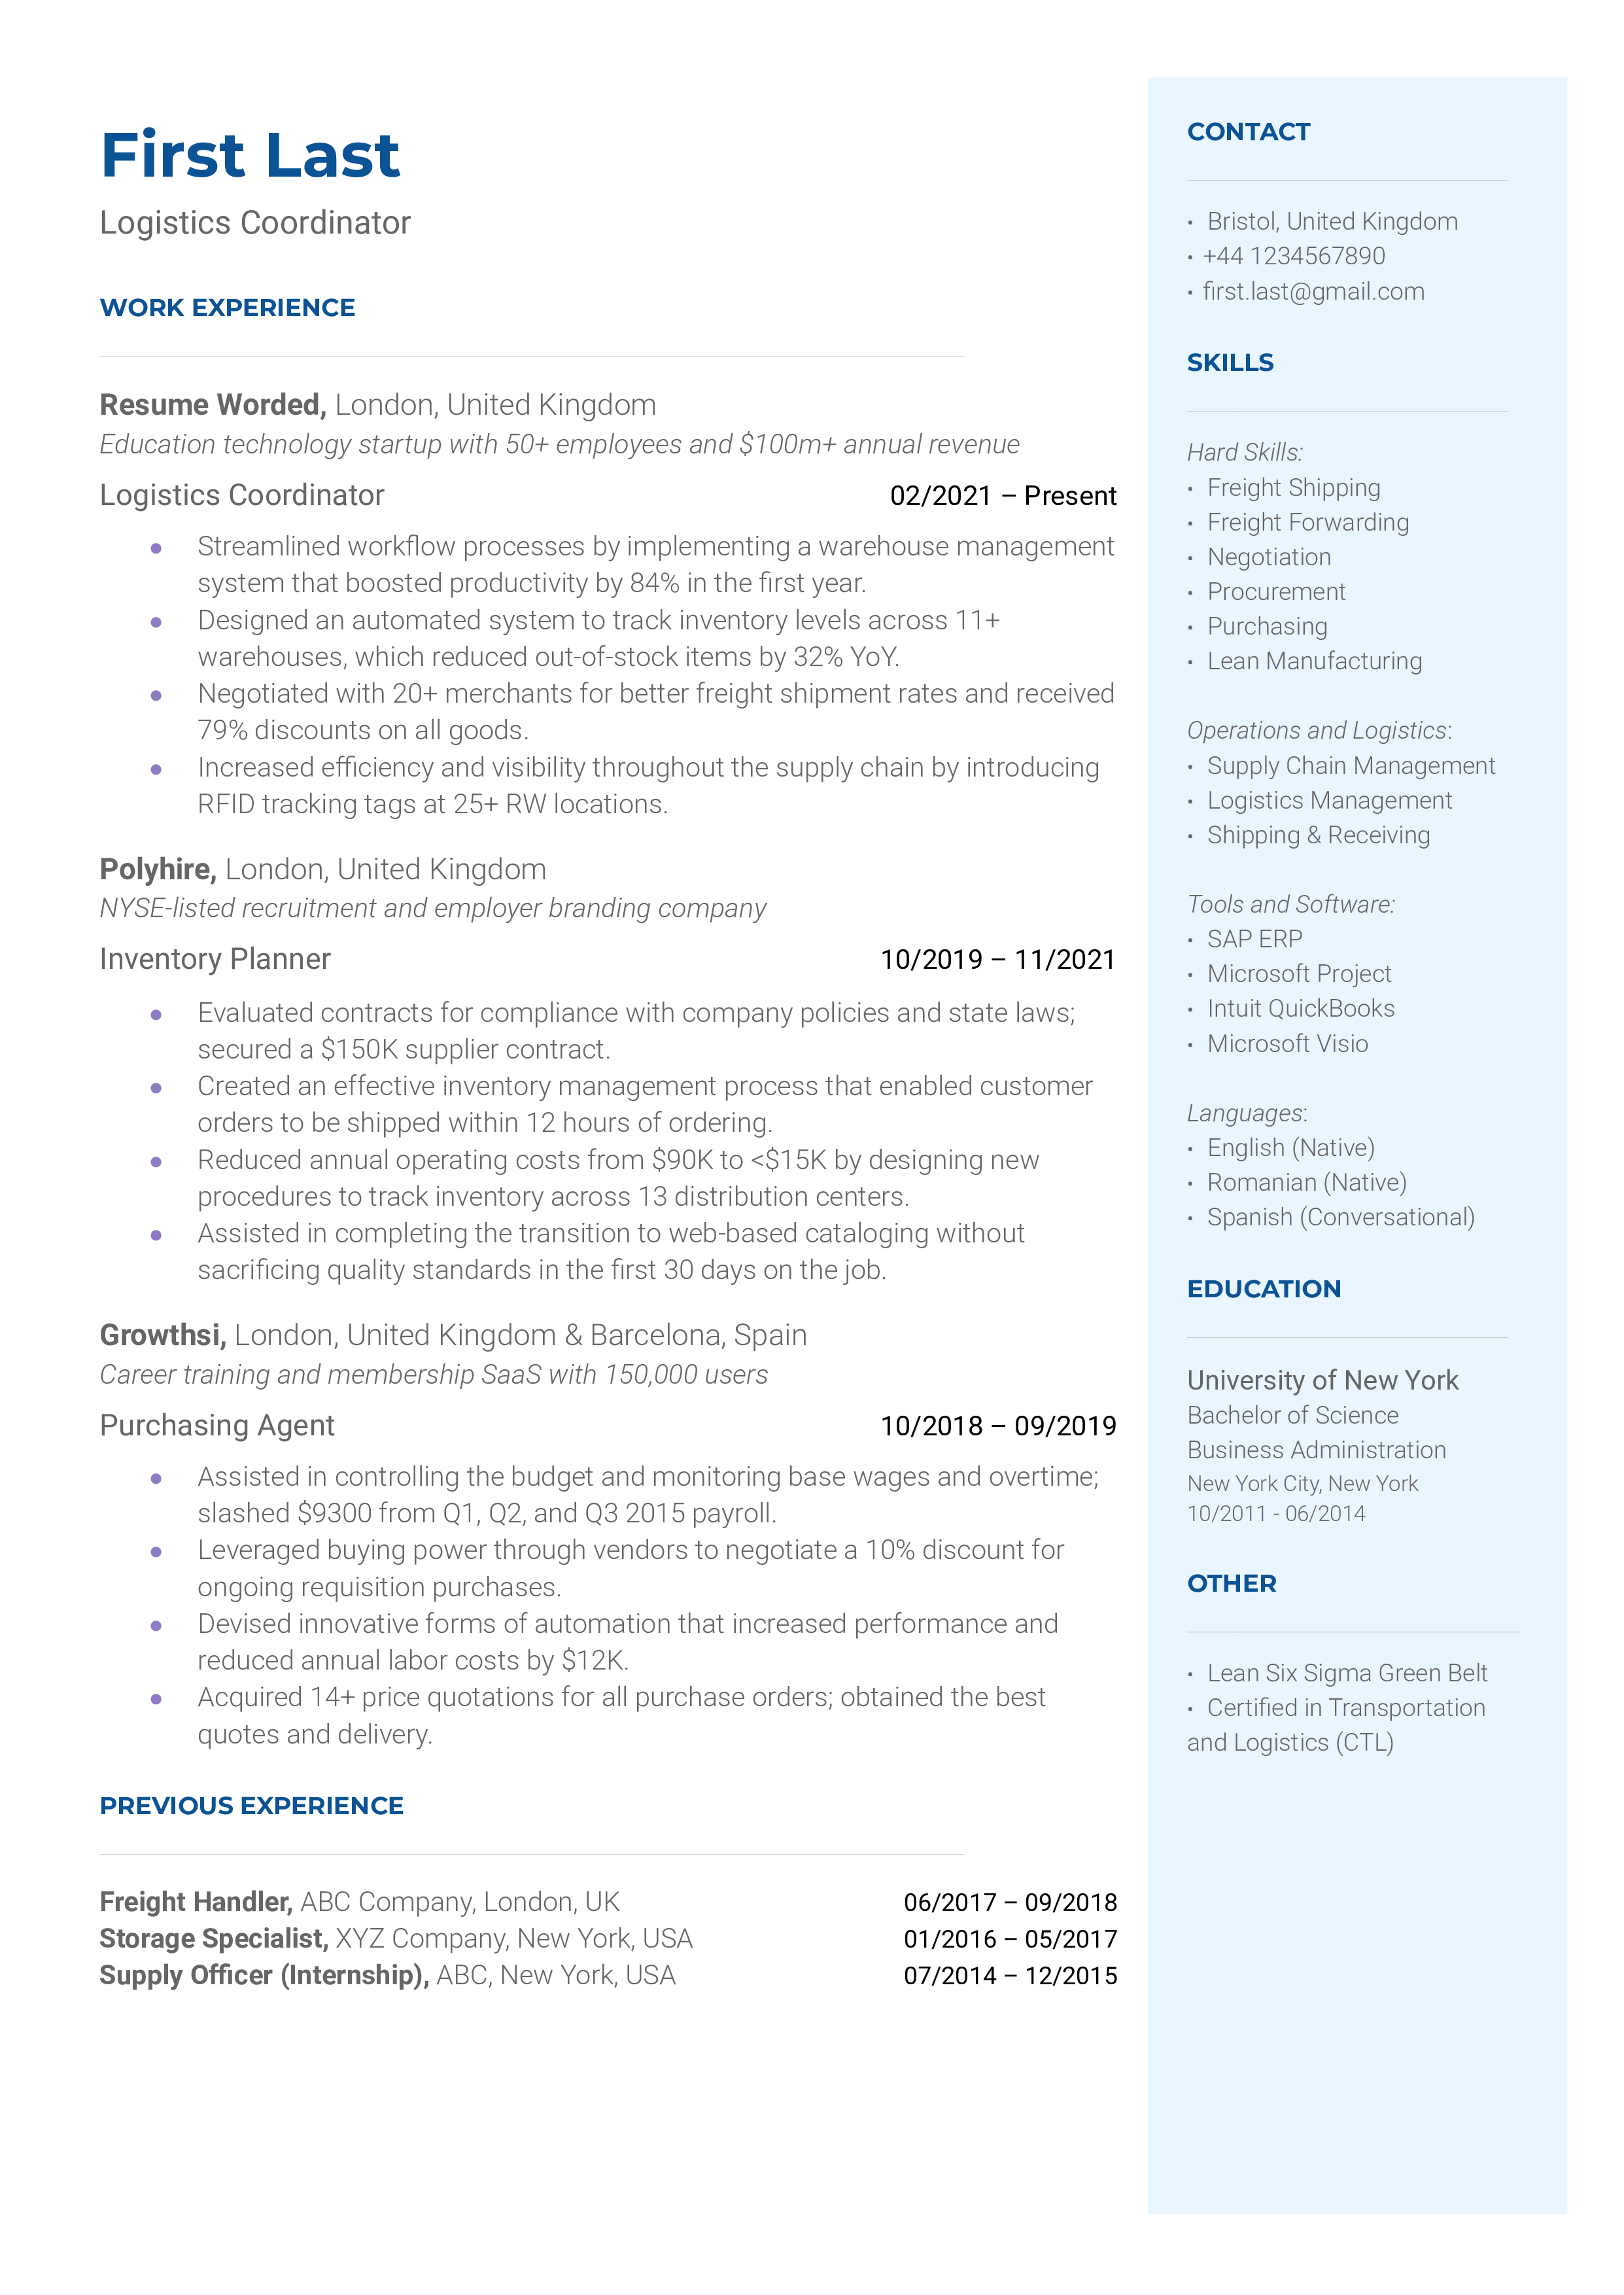 A logistics coordinator resume sample that highlights the candidate’s career progression and customer service experience.